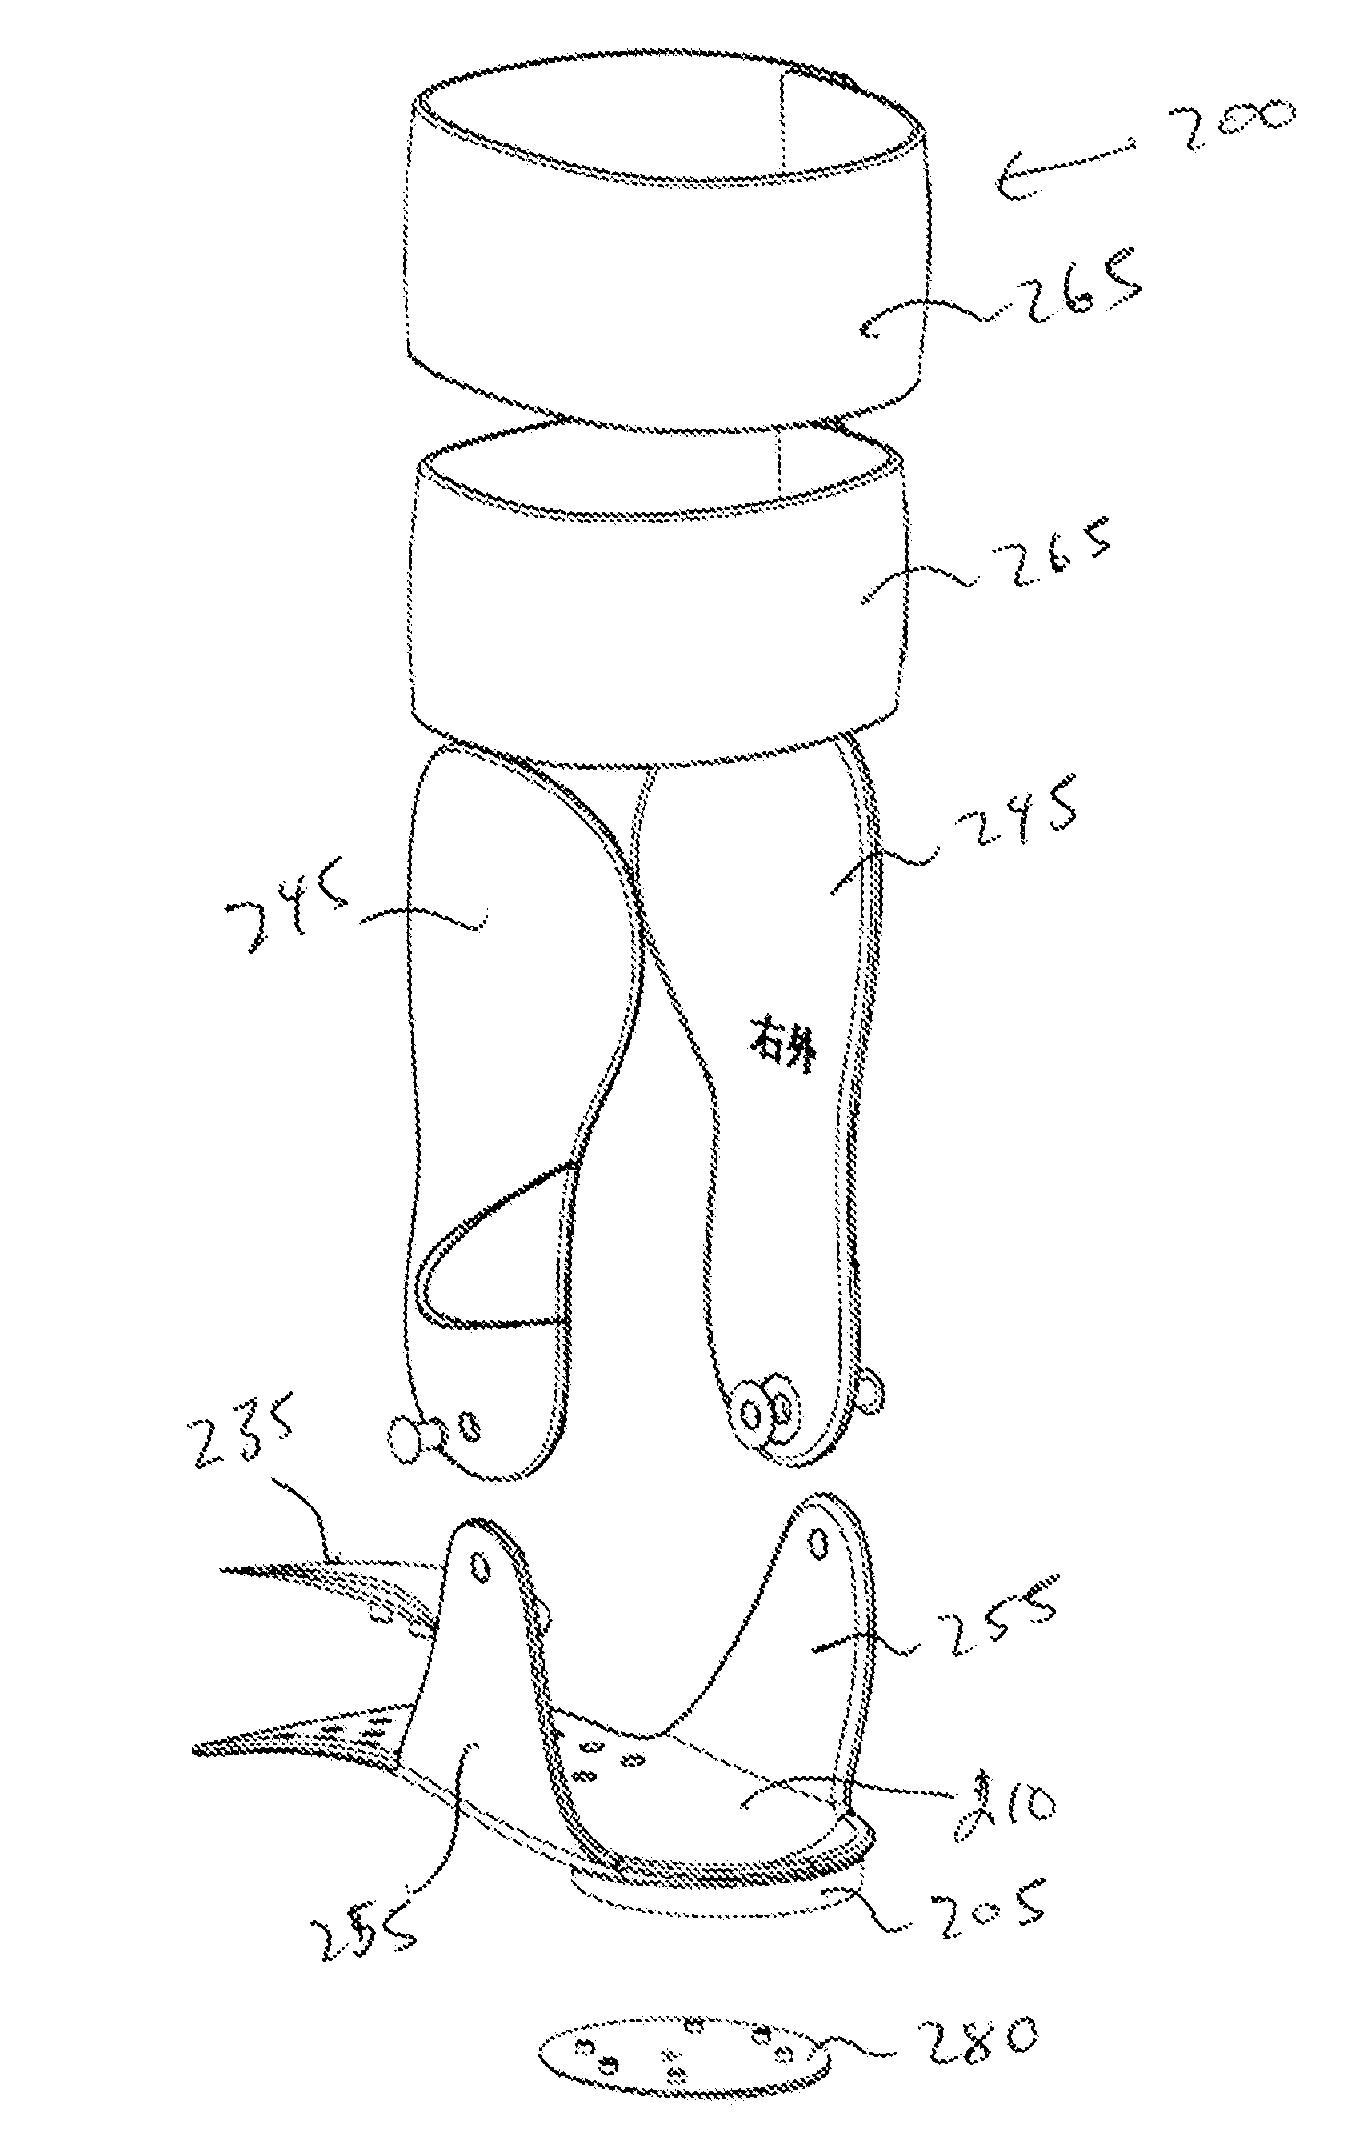 Ankle brace and method of using same